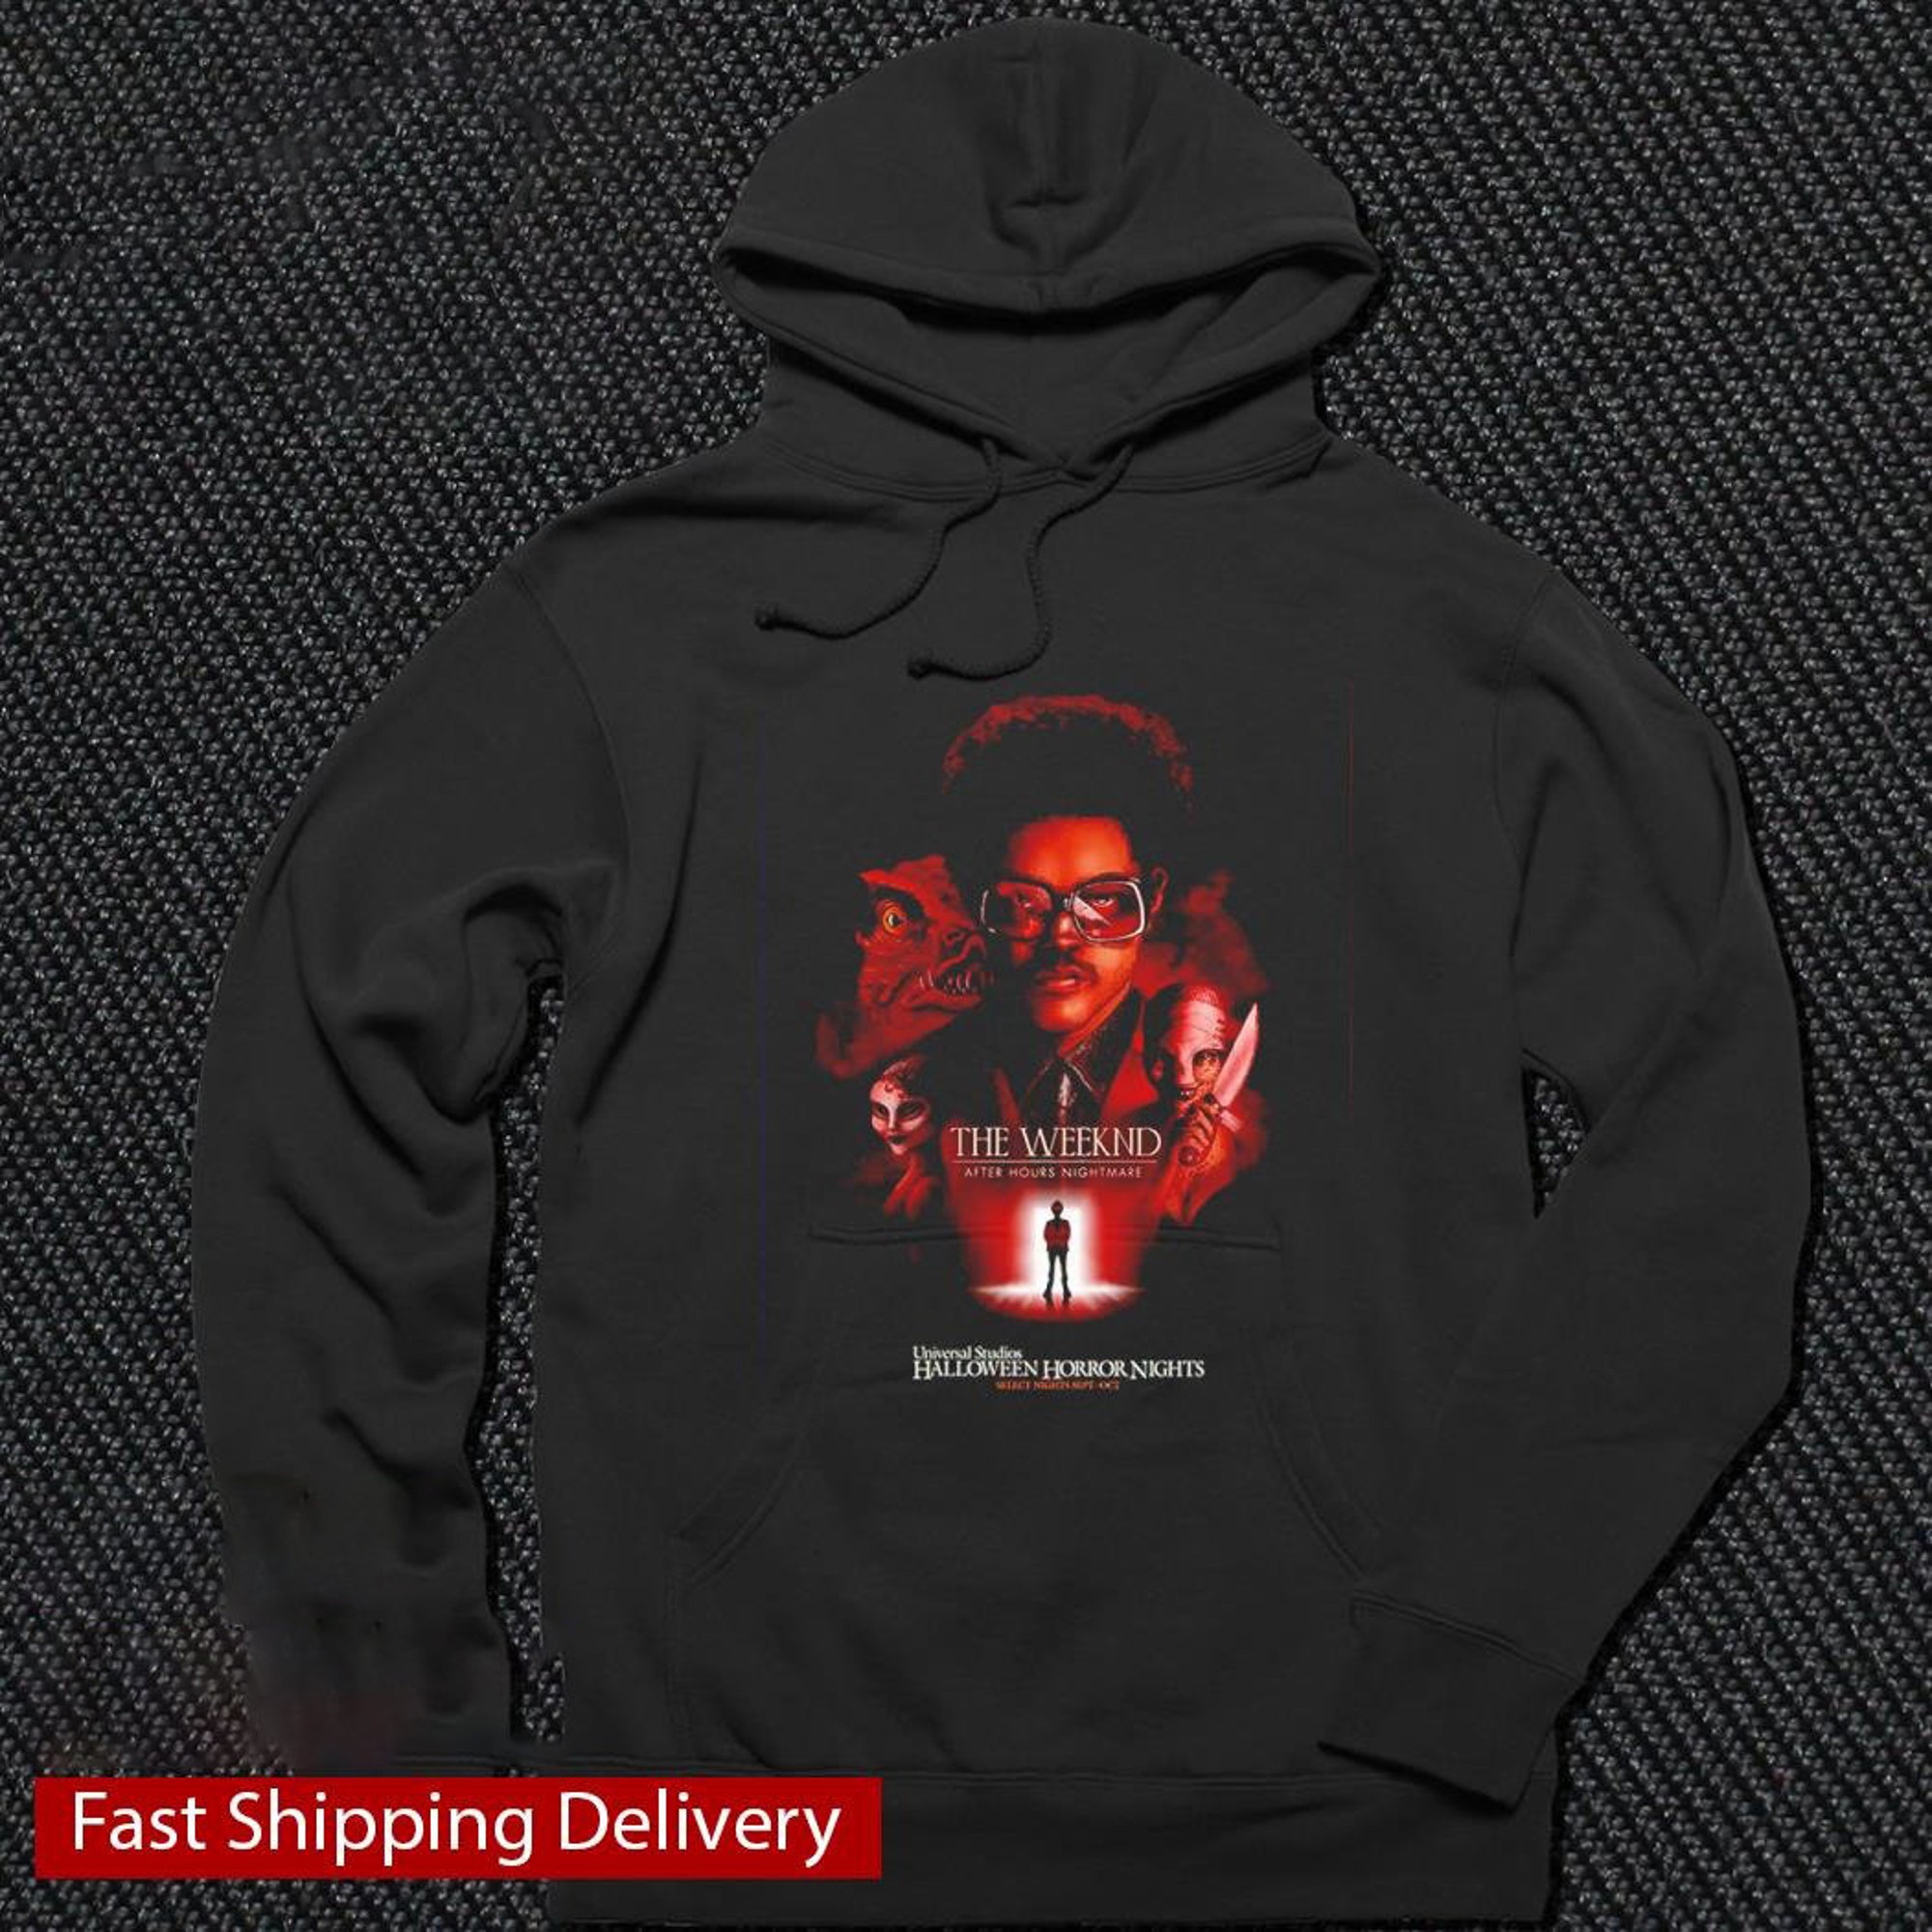 Discover The Weeknd After Hours Nightmare Shirt, The Weeknd T-Shirt Sweatshirt After Hours Til Dawn Tour Concert 2022 Shirts, XO shirt